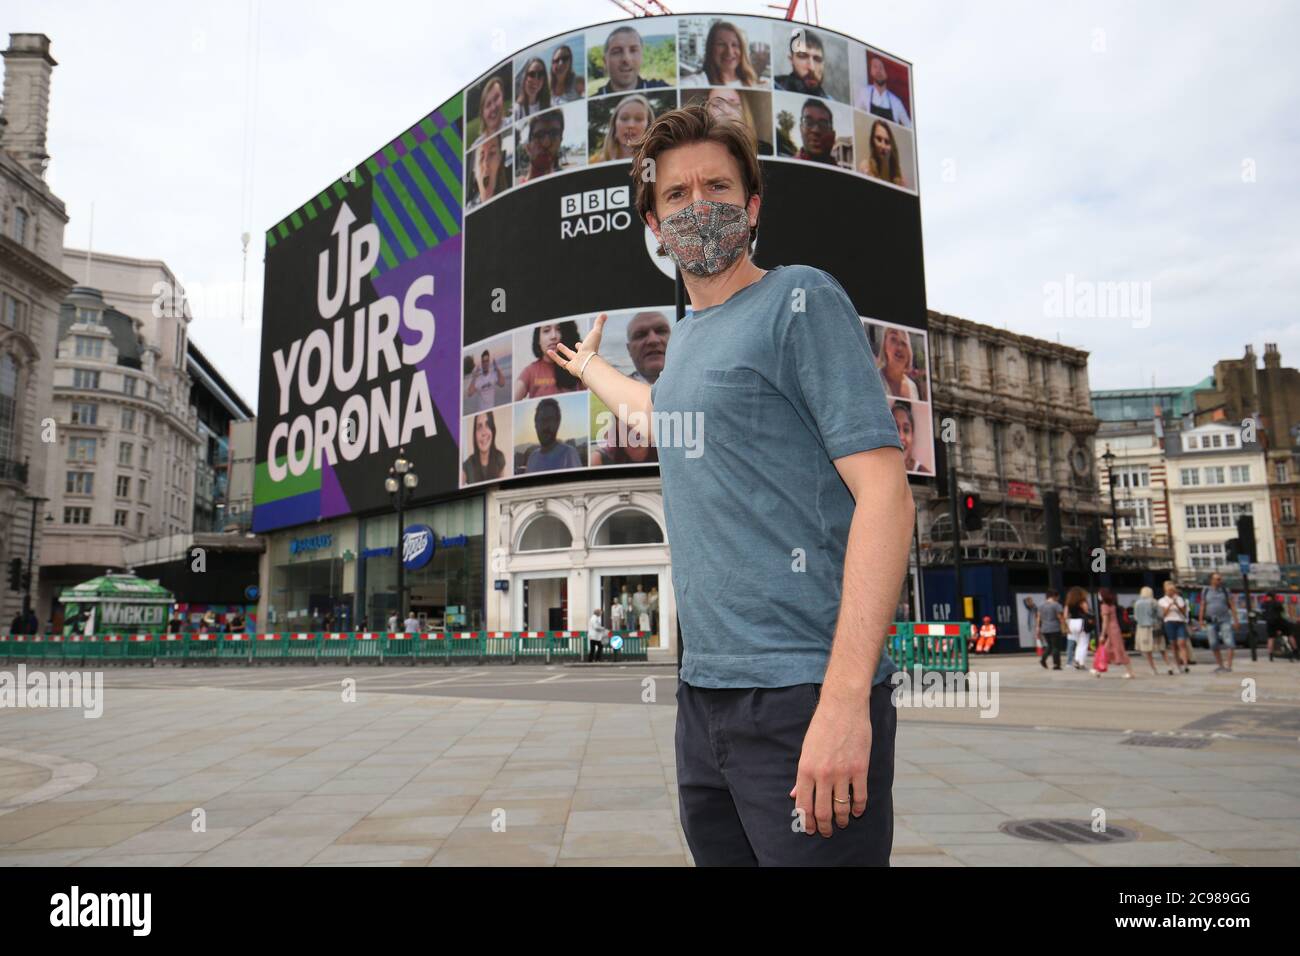 BBC Radio 1 DJ Greg James at Piccadilly Circus, London, as the Radio 1 "Up  Yours Corona" campaign is displayed on the Piccadilly Lights screen. The 10  minute long display features one